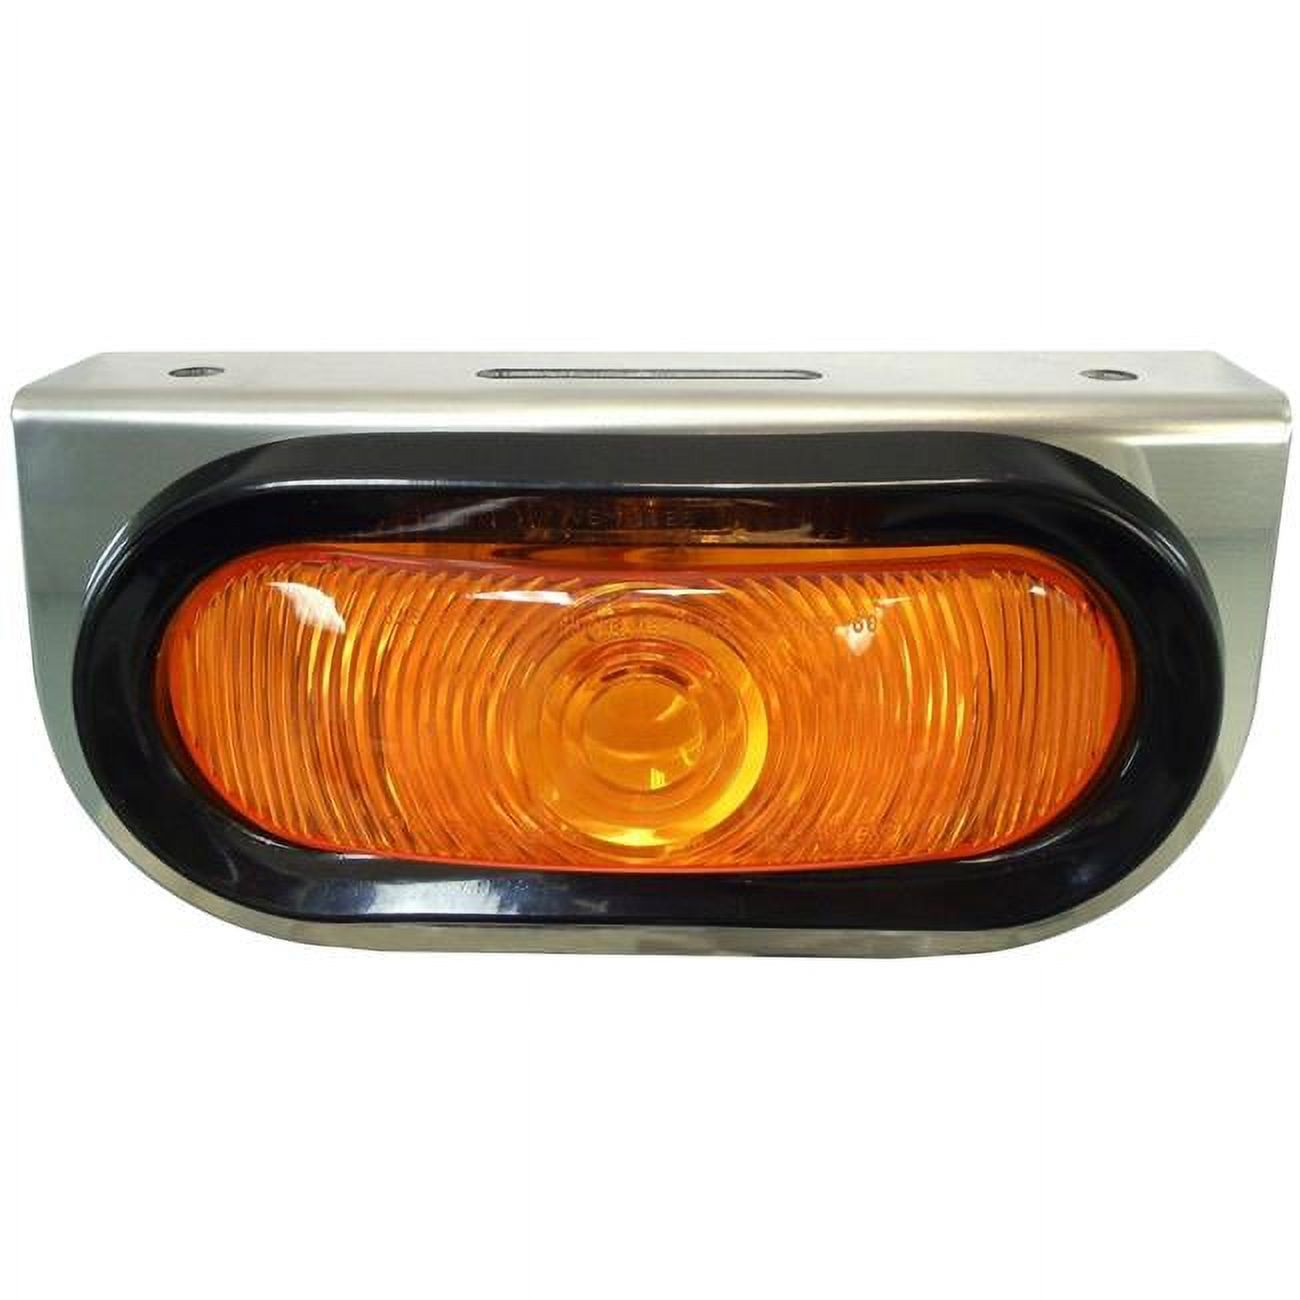 Barjan 04820402 6.5 in. SS Mount with Oval Amber Light & Wiring Harness - image 1 of 3